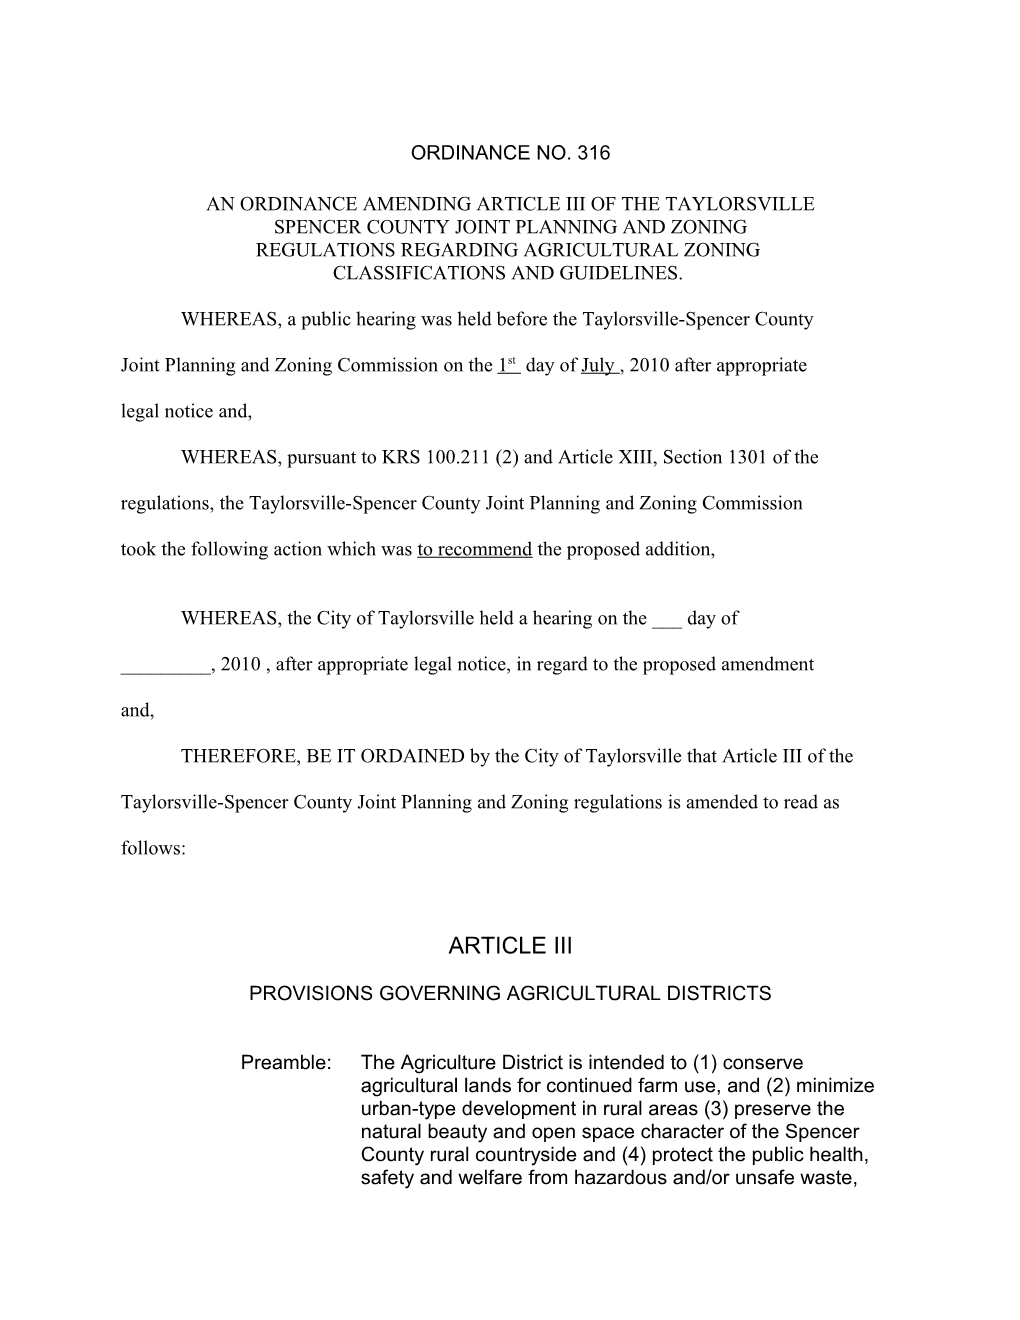 An Ordinance Amending Article Iii of the Taylorsville